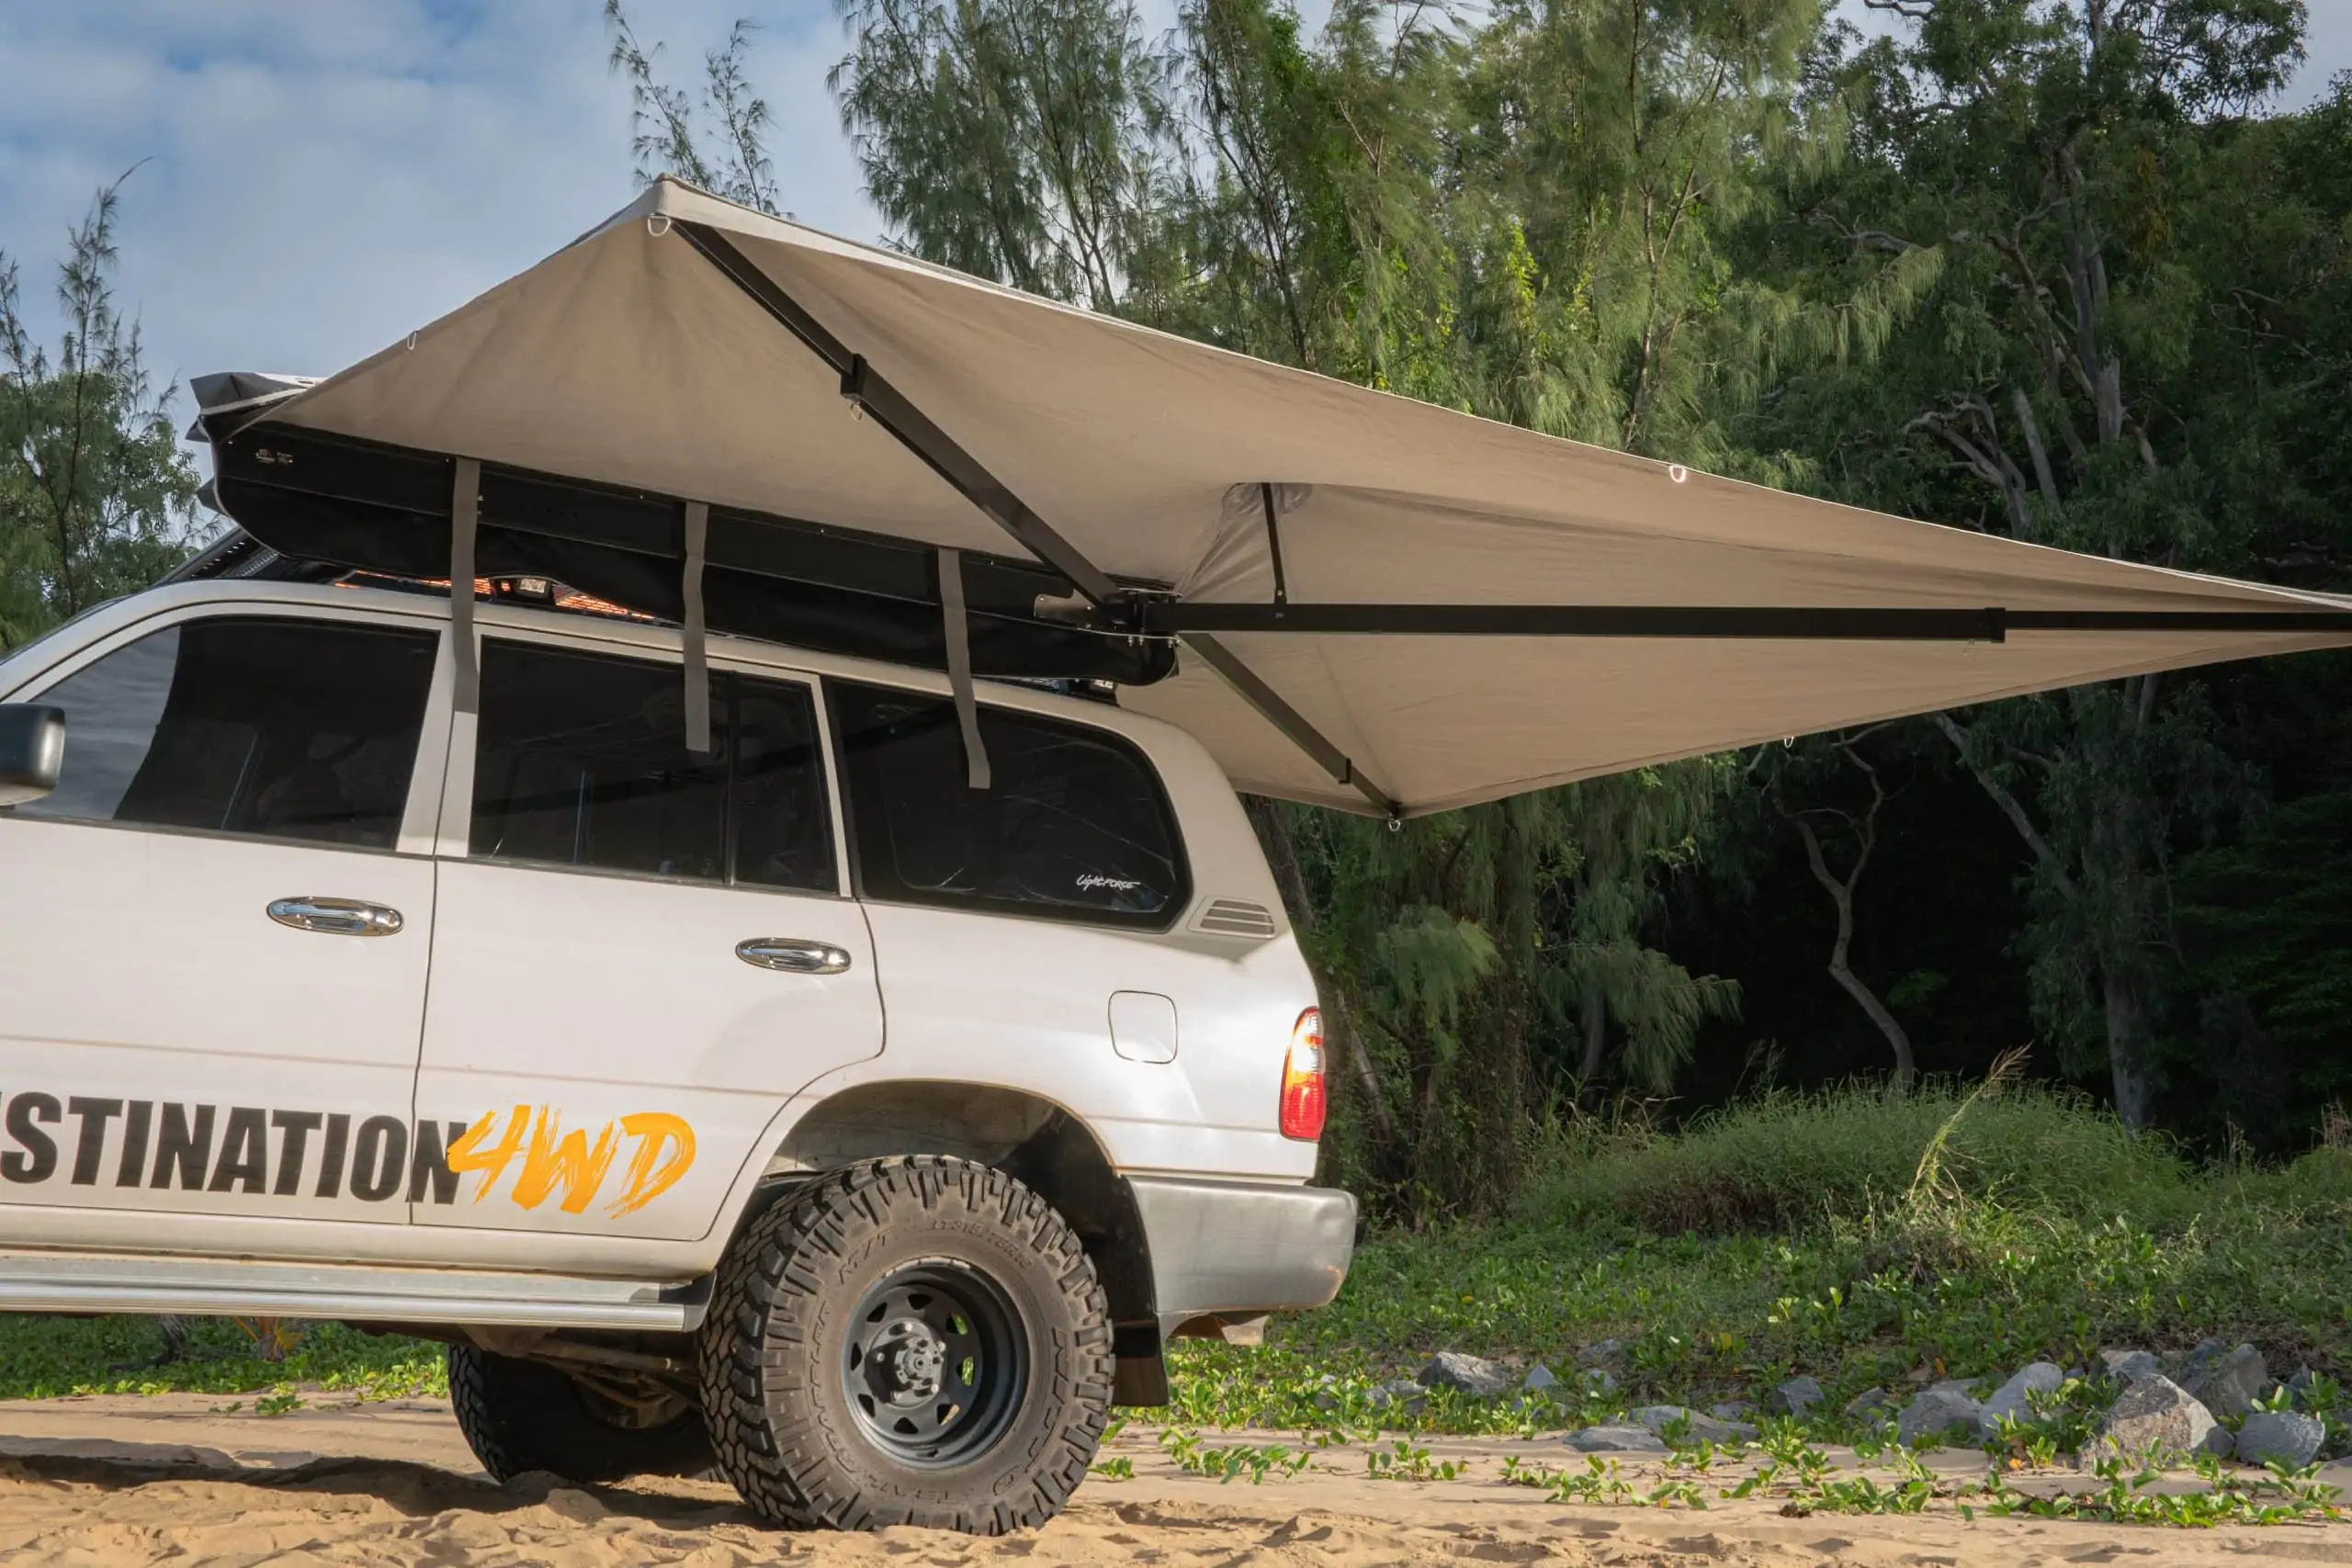 Destination4WD D270 degree free standing awning Australian made and manufactured underneath